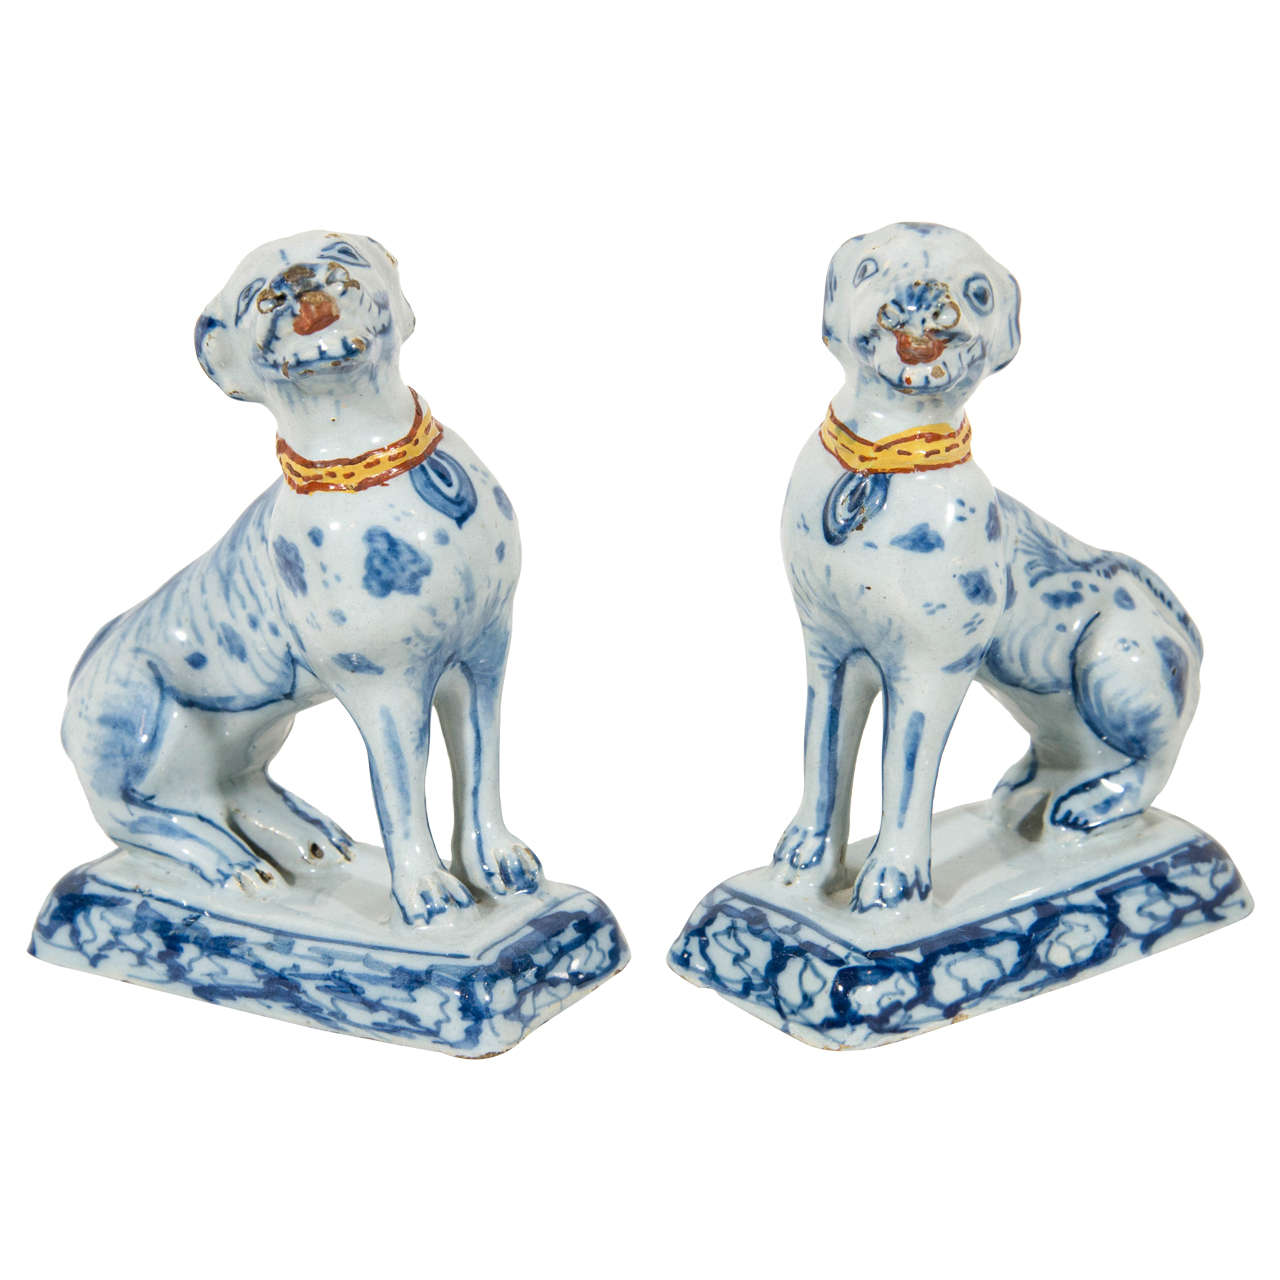 Pair of 18th Century Dutch Delft Blue and White Dogs with Polychrome Collars